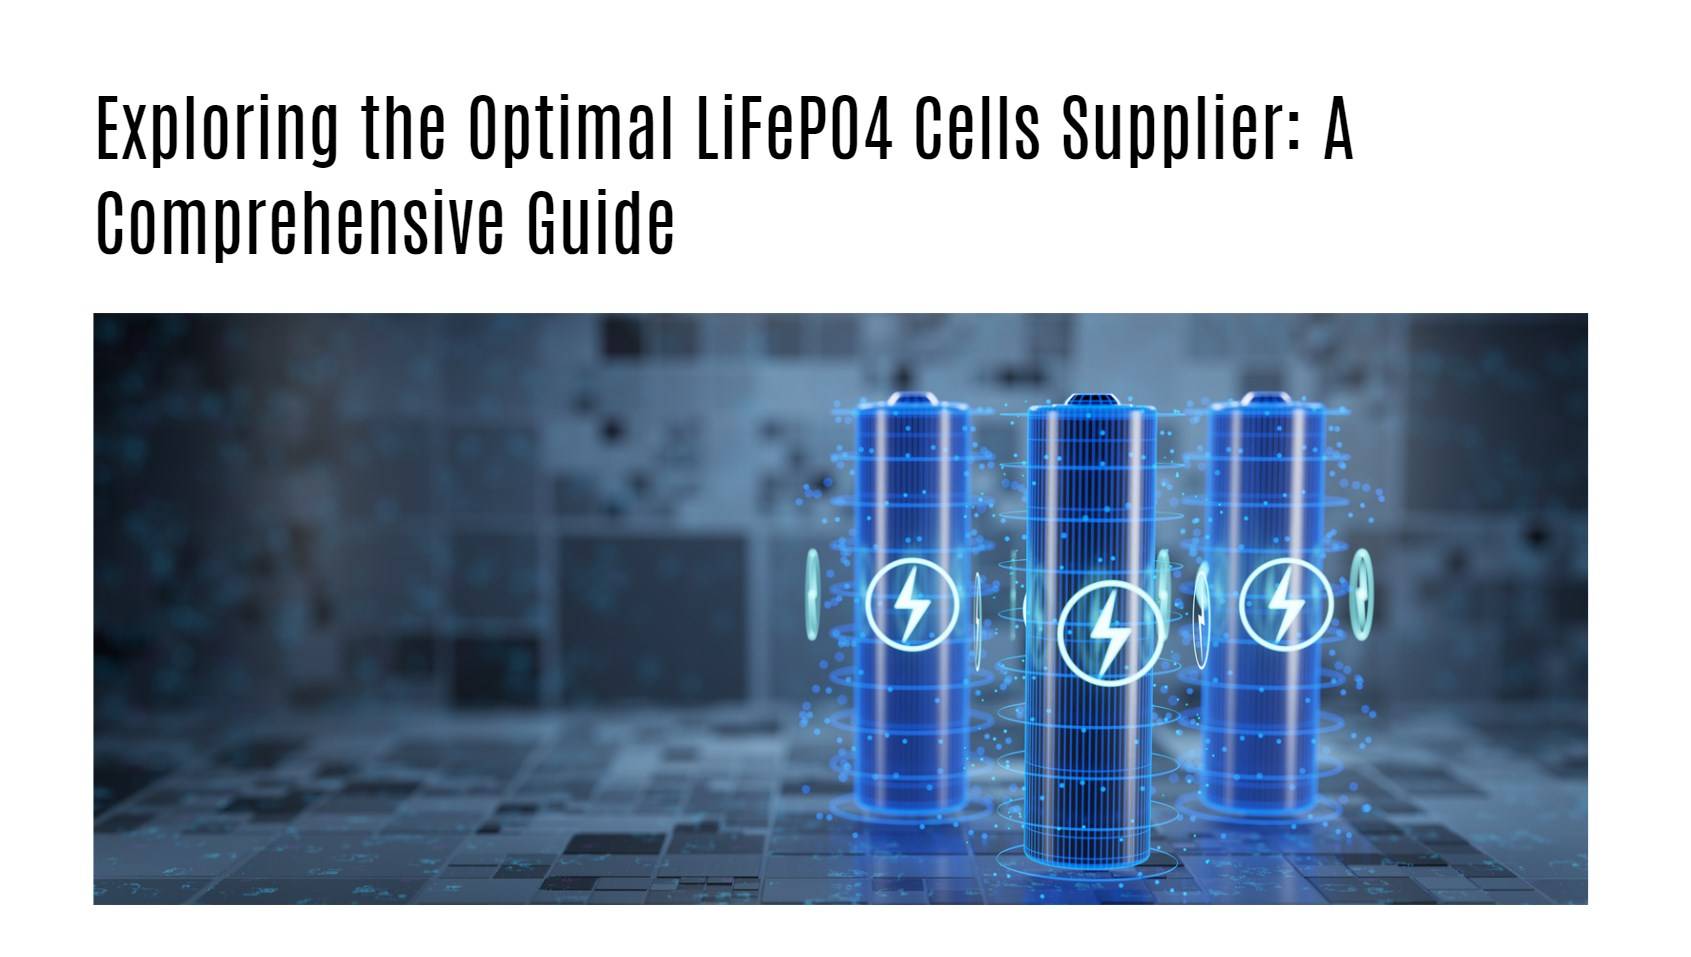 Exploring the Optimal LiFePO4 Cells Supplier: A Comprehensive Guide